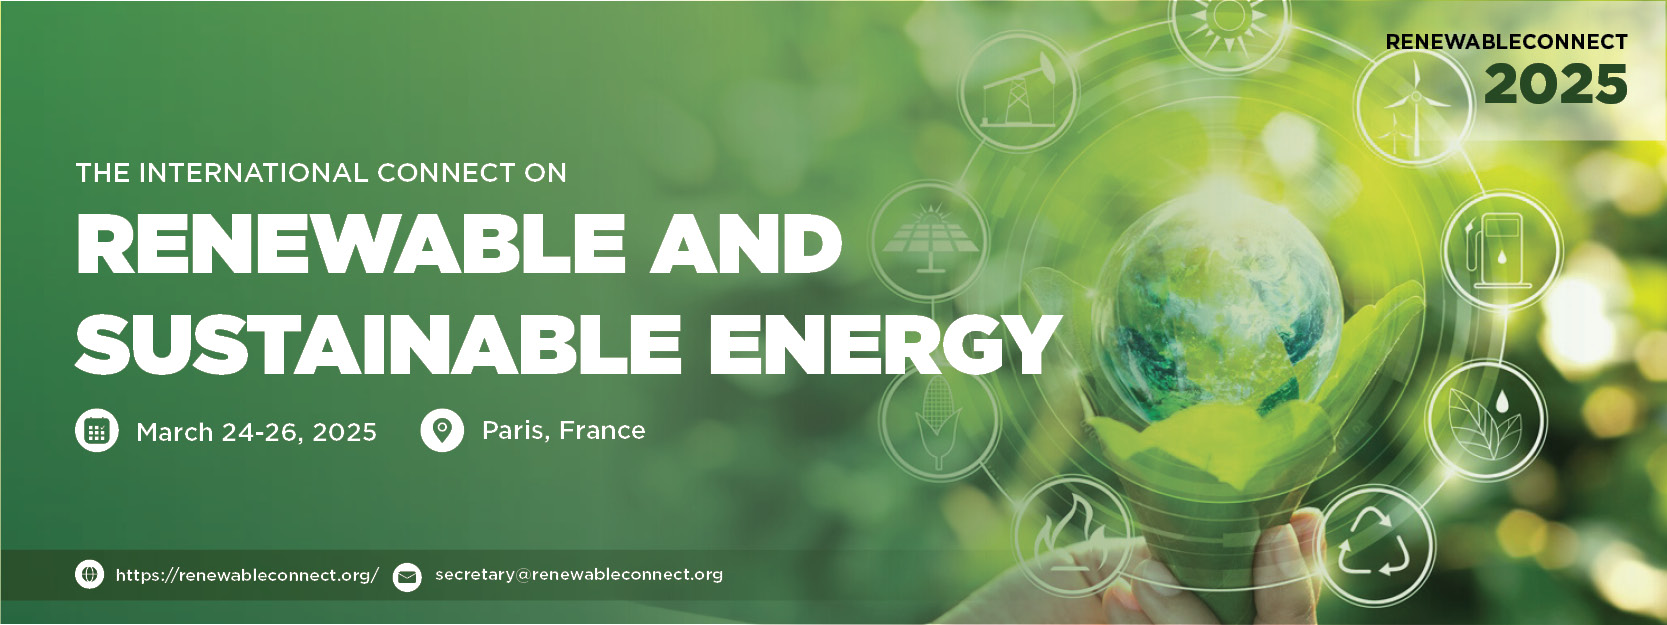 International Connect on Renewable and Sustainable Energy, Paris, Finistère, France